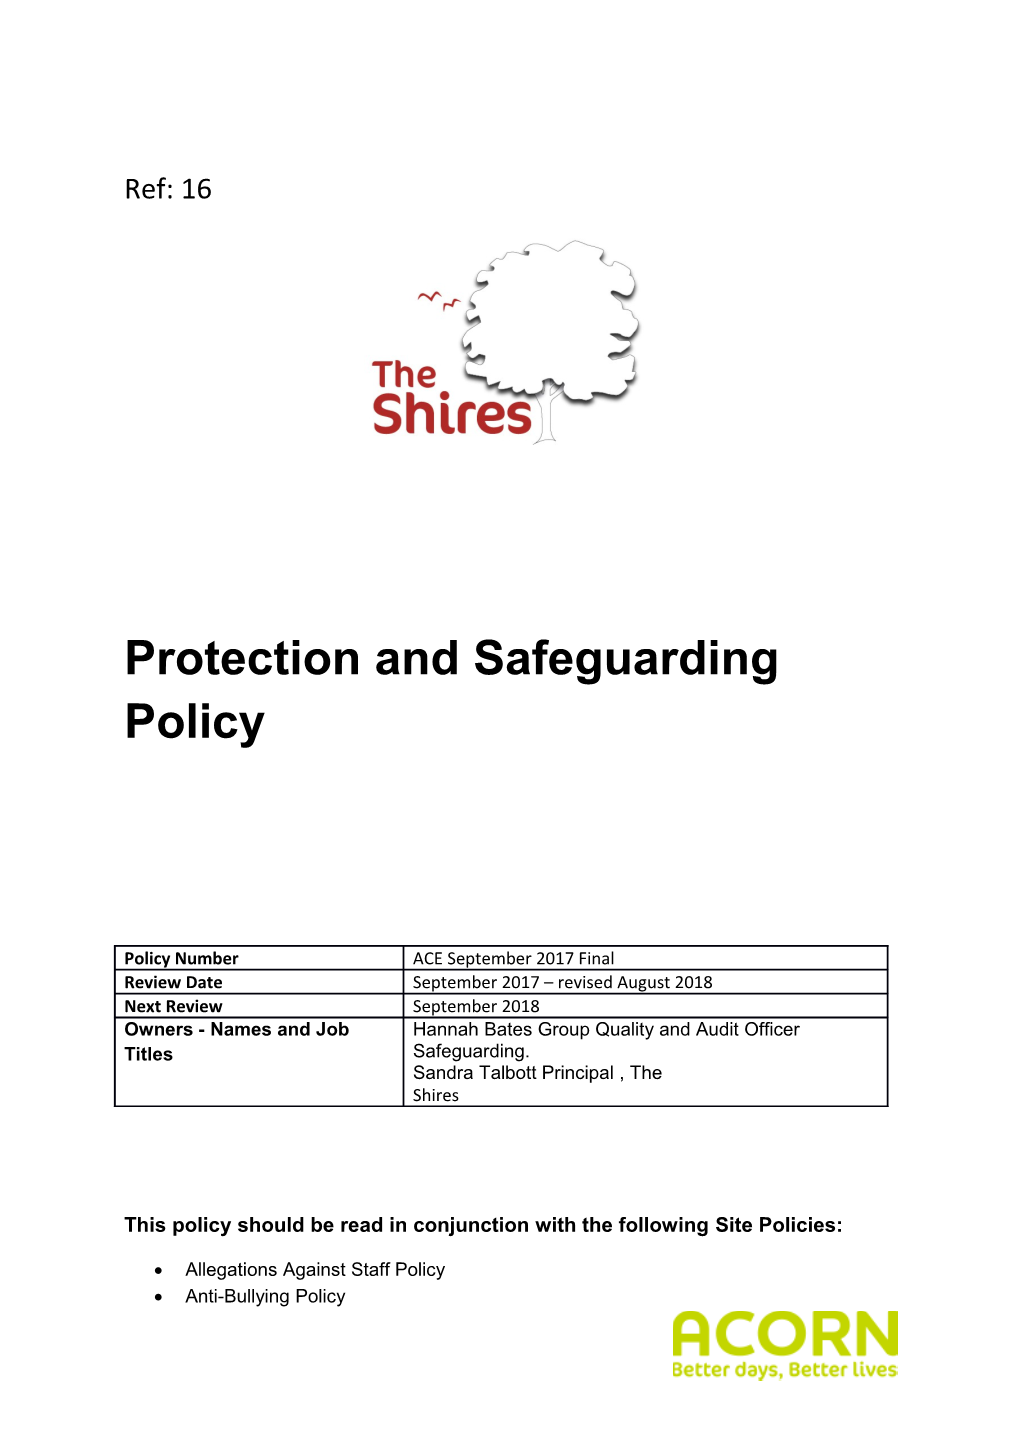 Protection and Safeguarding Policy